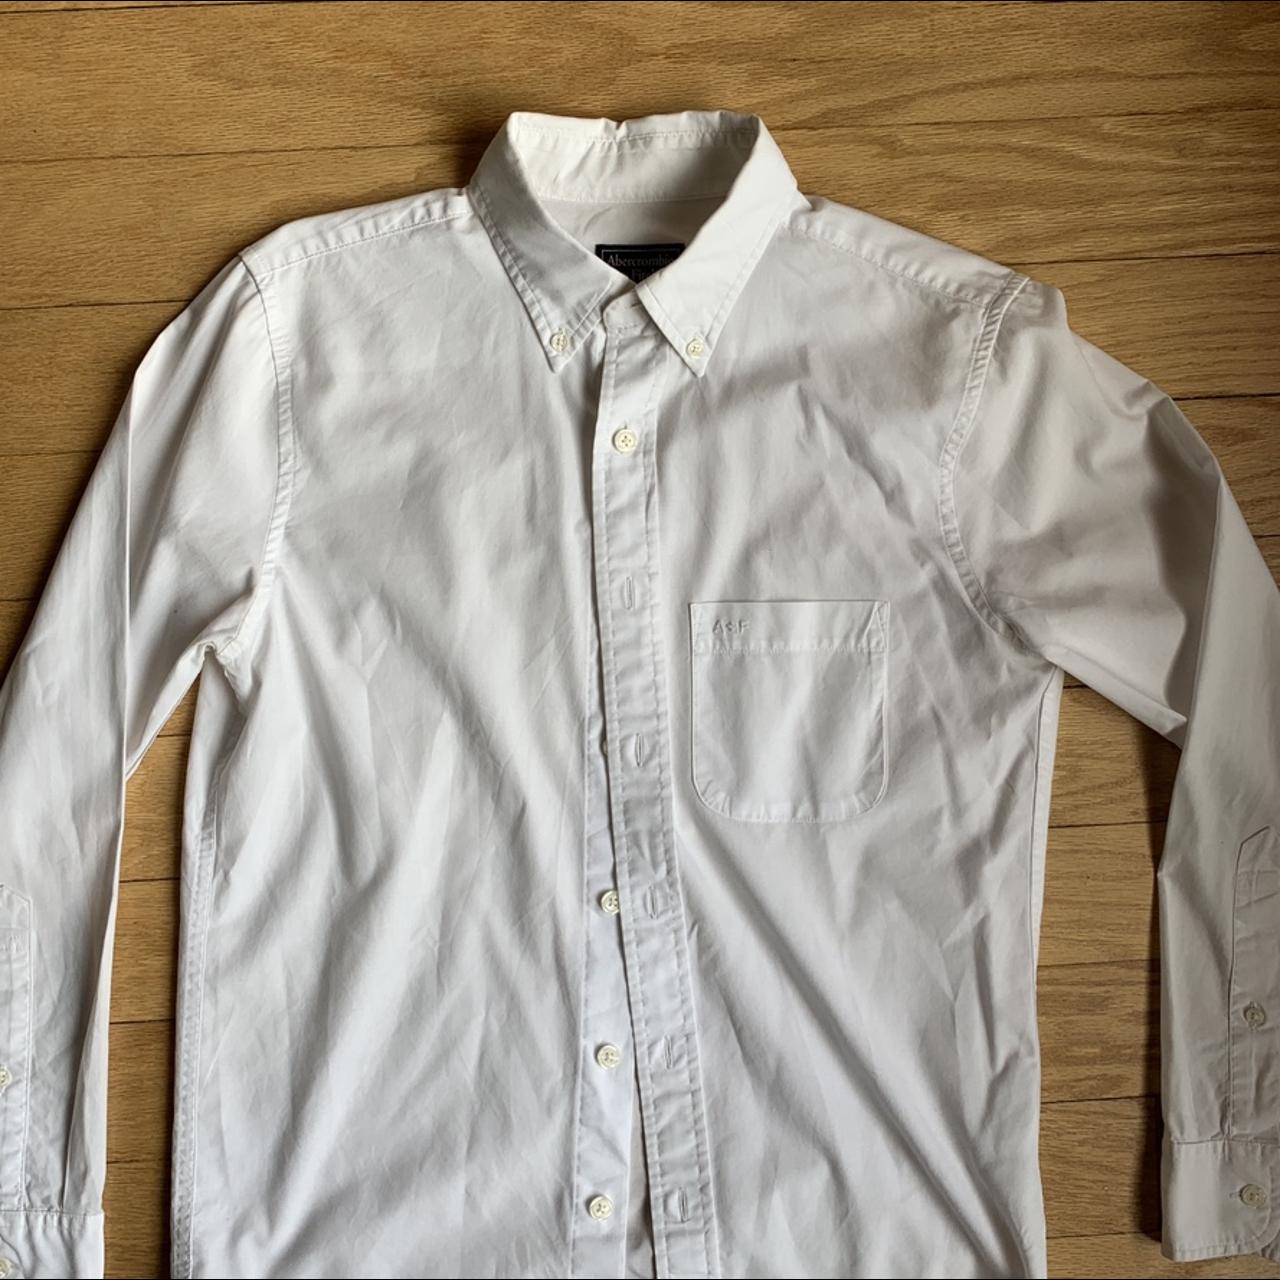 Abercrombie And Fitch White Button Down Shirt Depop